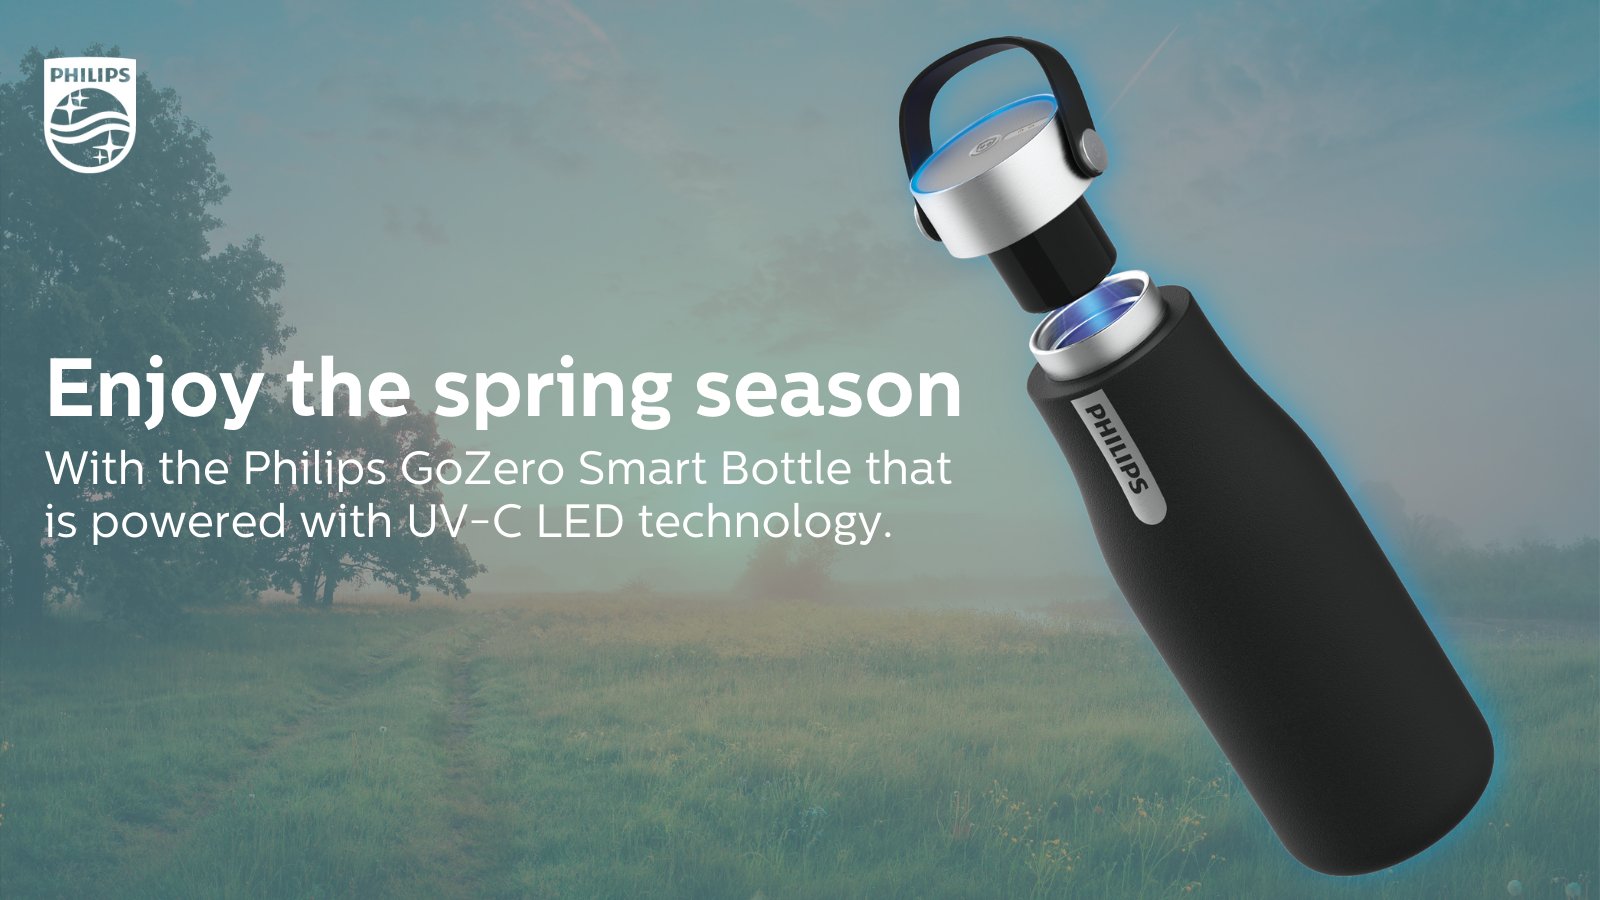 Philips Water US on X: This spring, power your go with the power